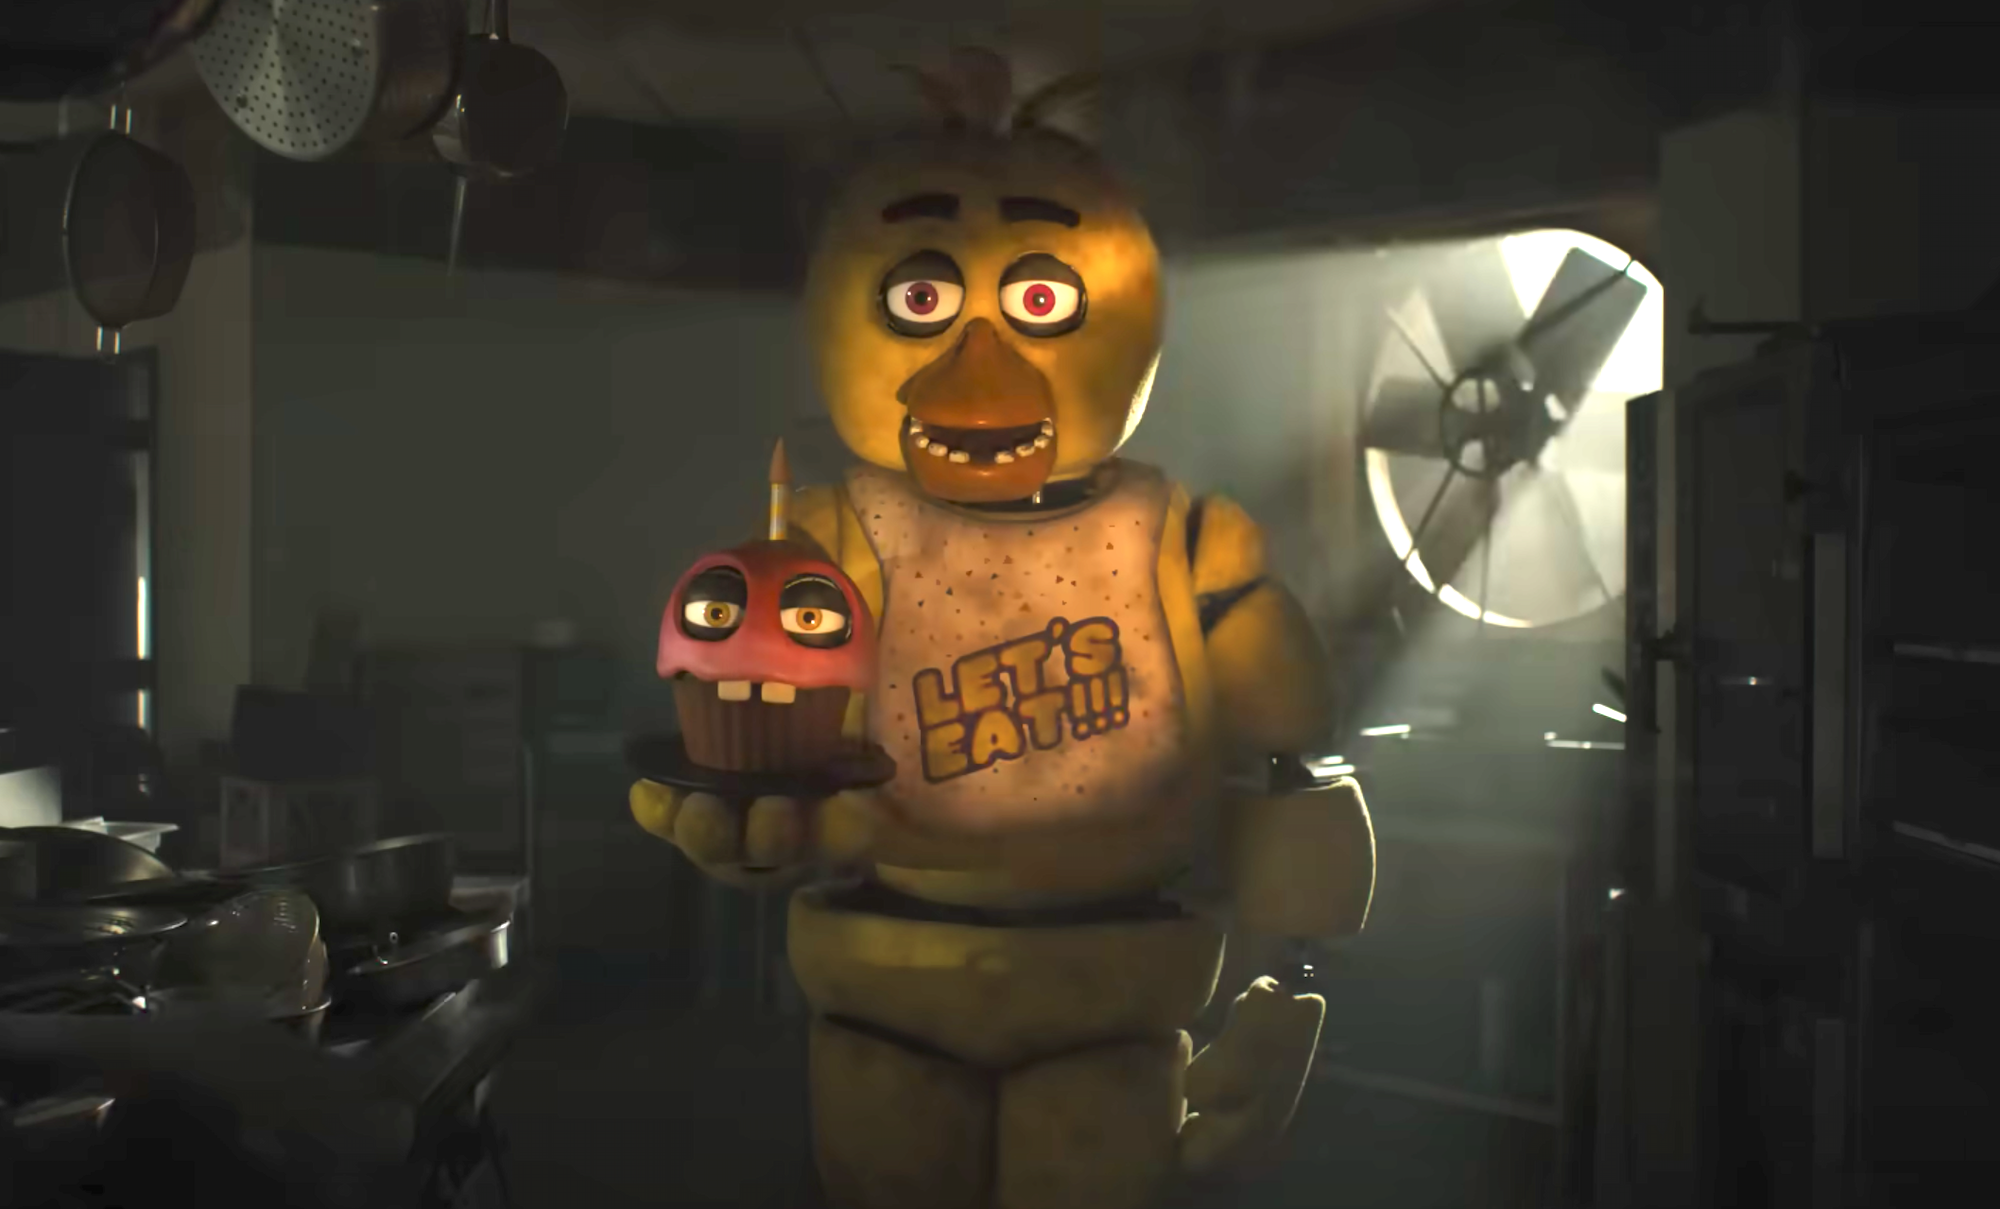 New Five Nights at Freddy’s movie trailer shows the murderous animatronics in action